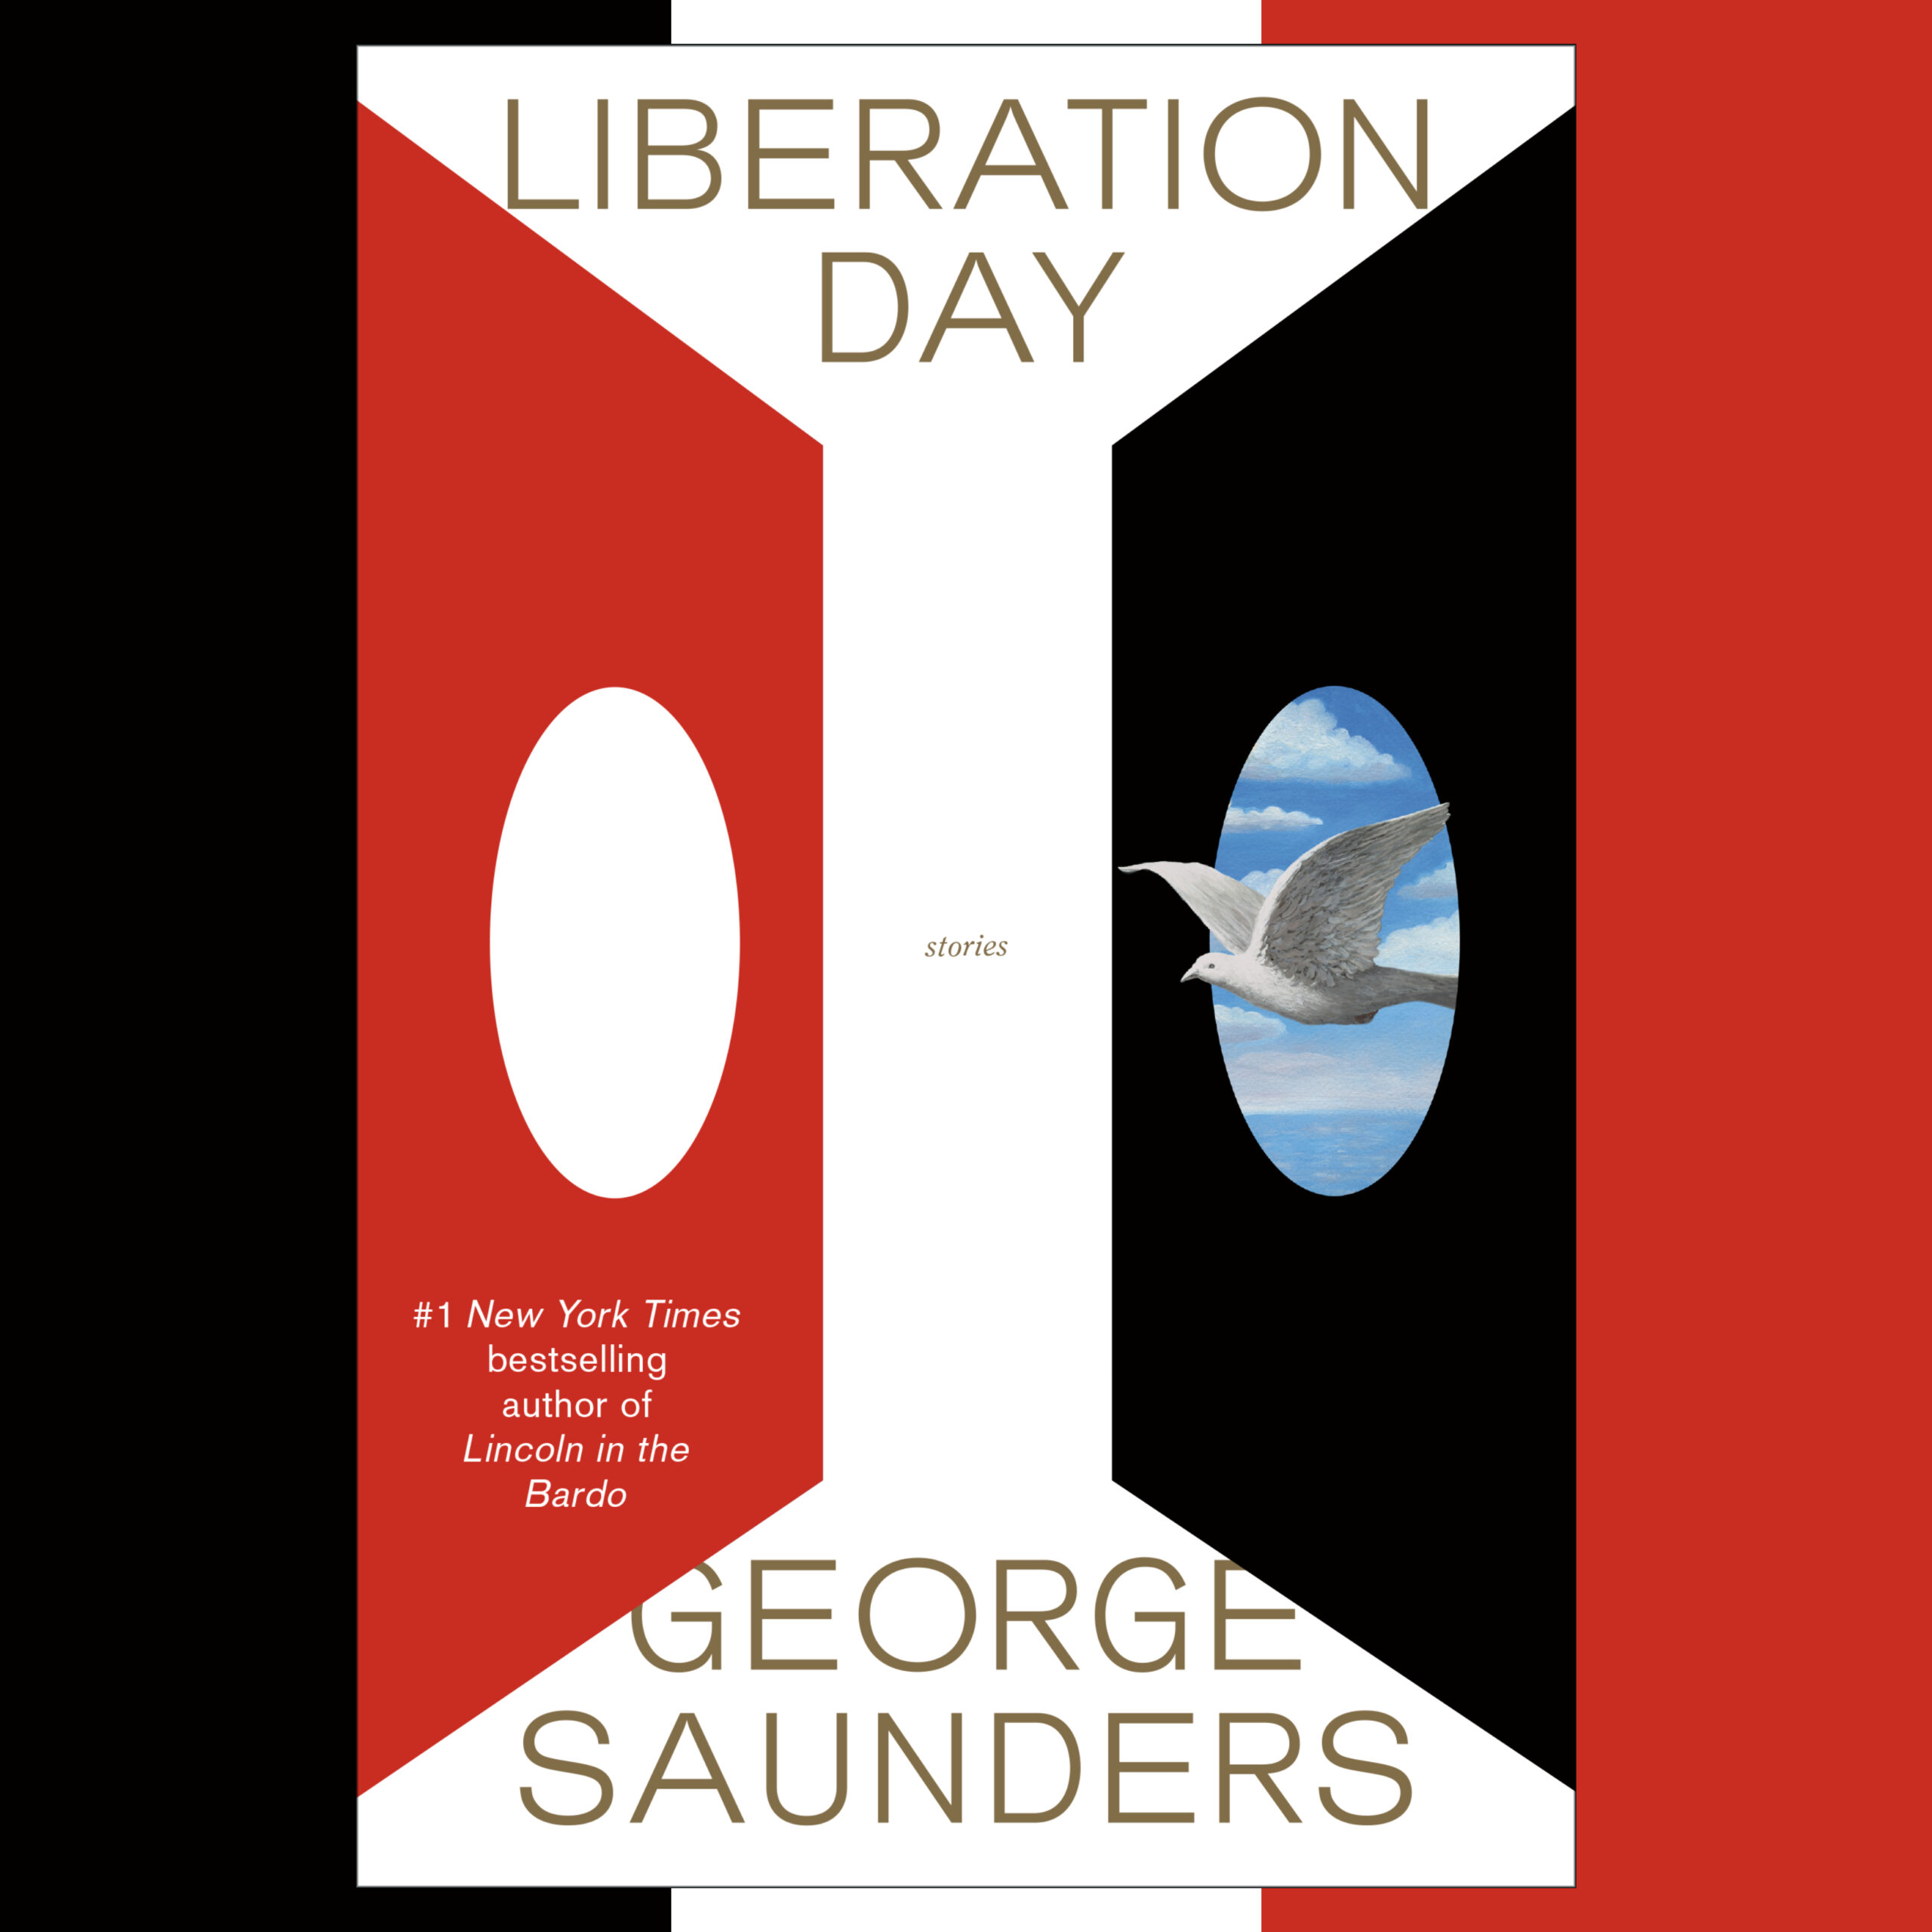 The Book Show - George Saunders - Liberation Day